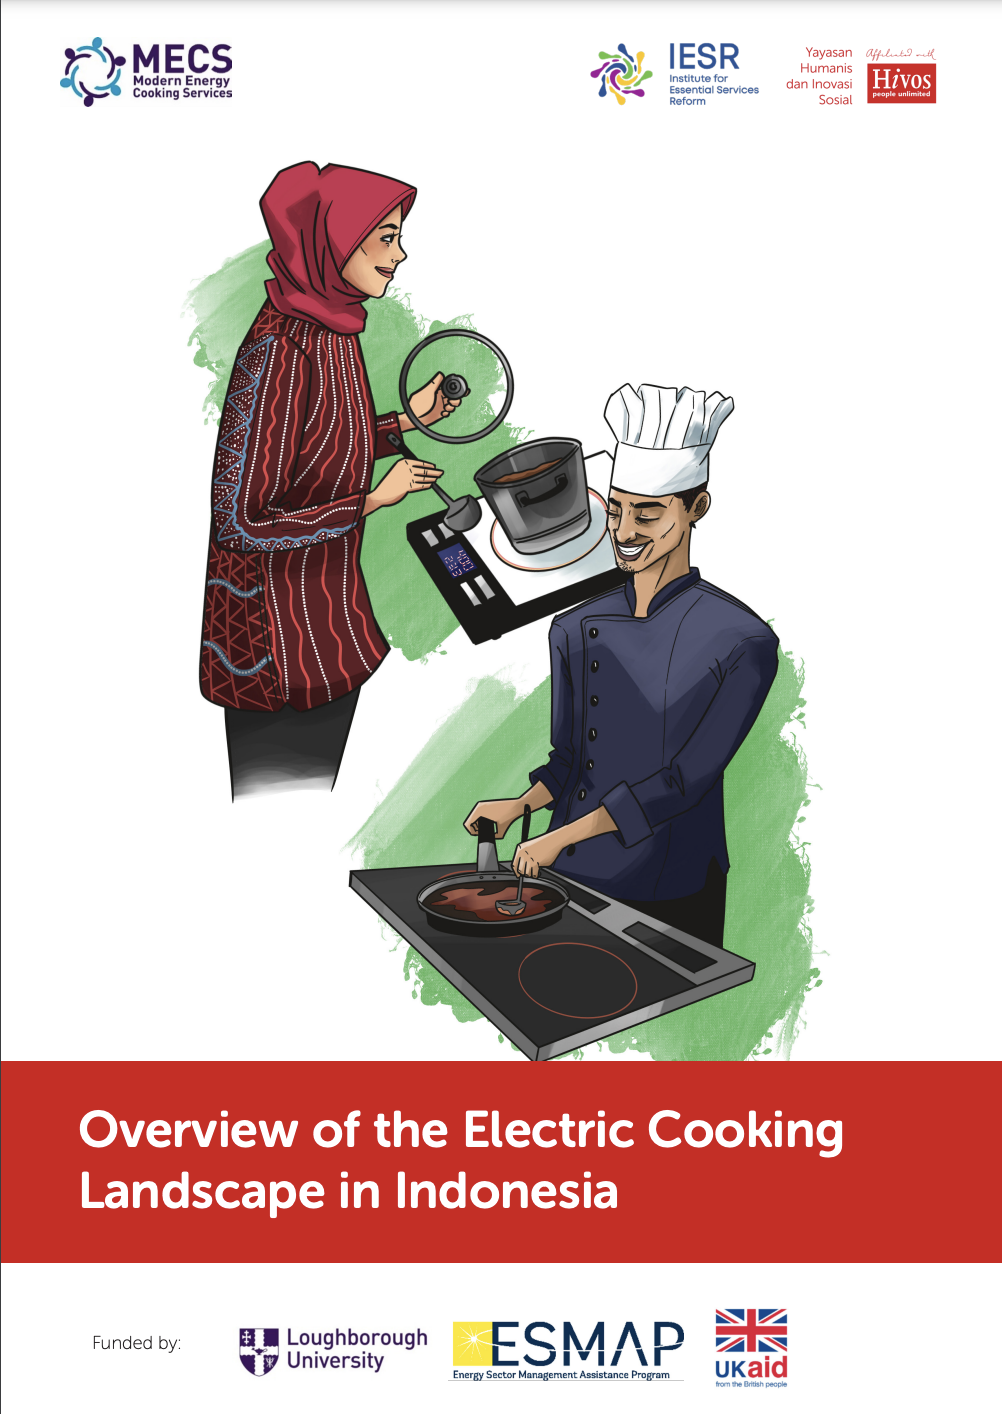 Overview of the Electric Cooking Landscape in Indonesia